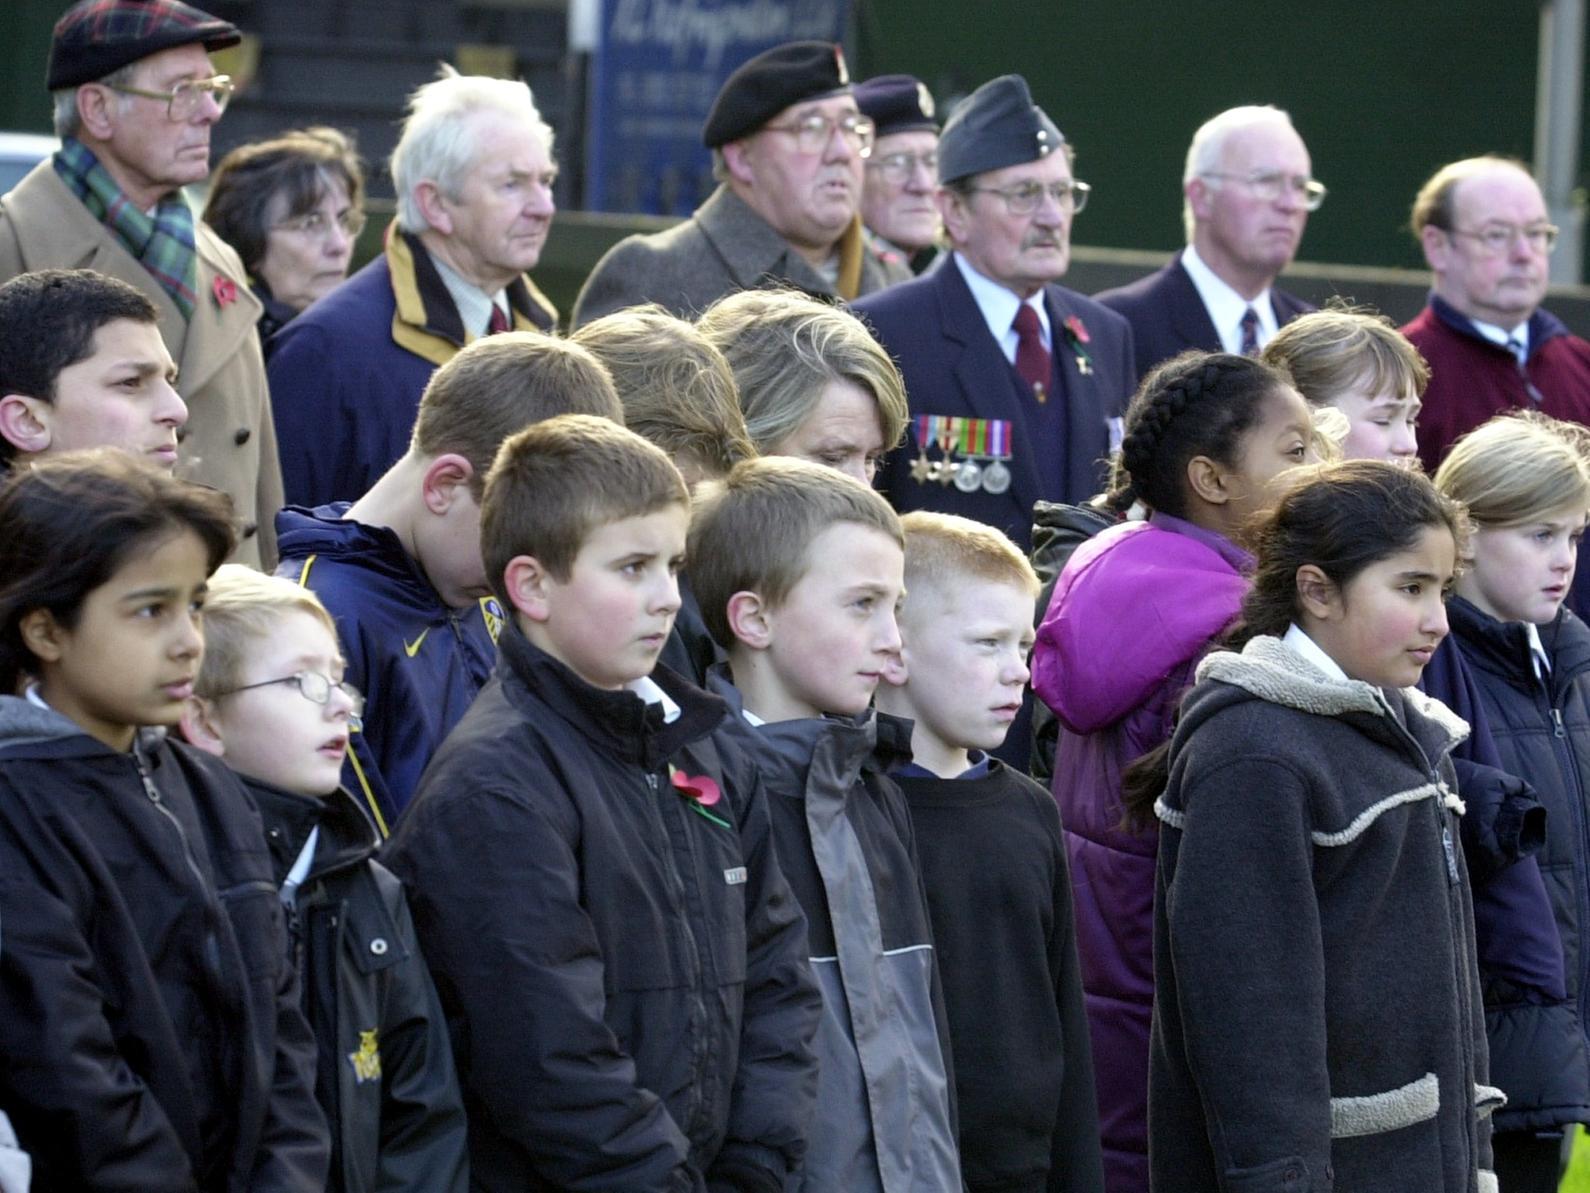 Pupils watch intently the remembrance service held by the school at the war memorial in Armley Park.